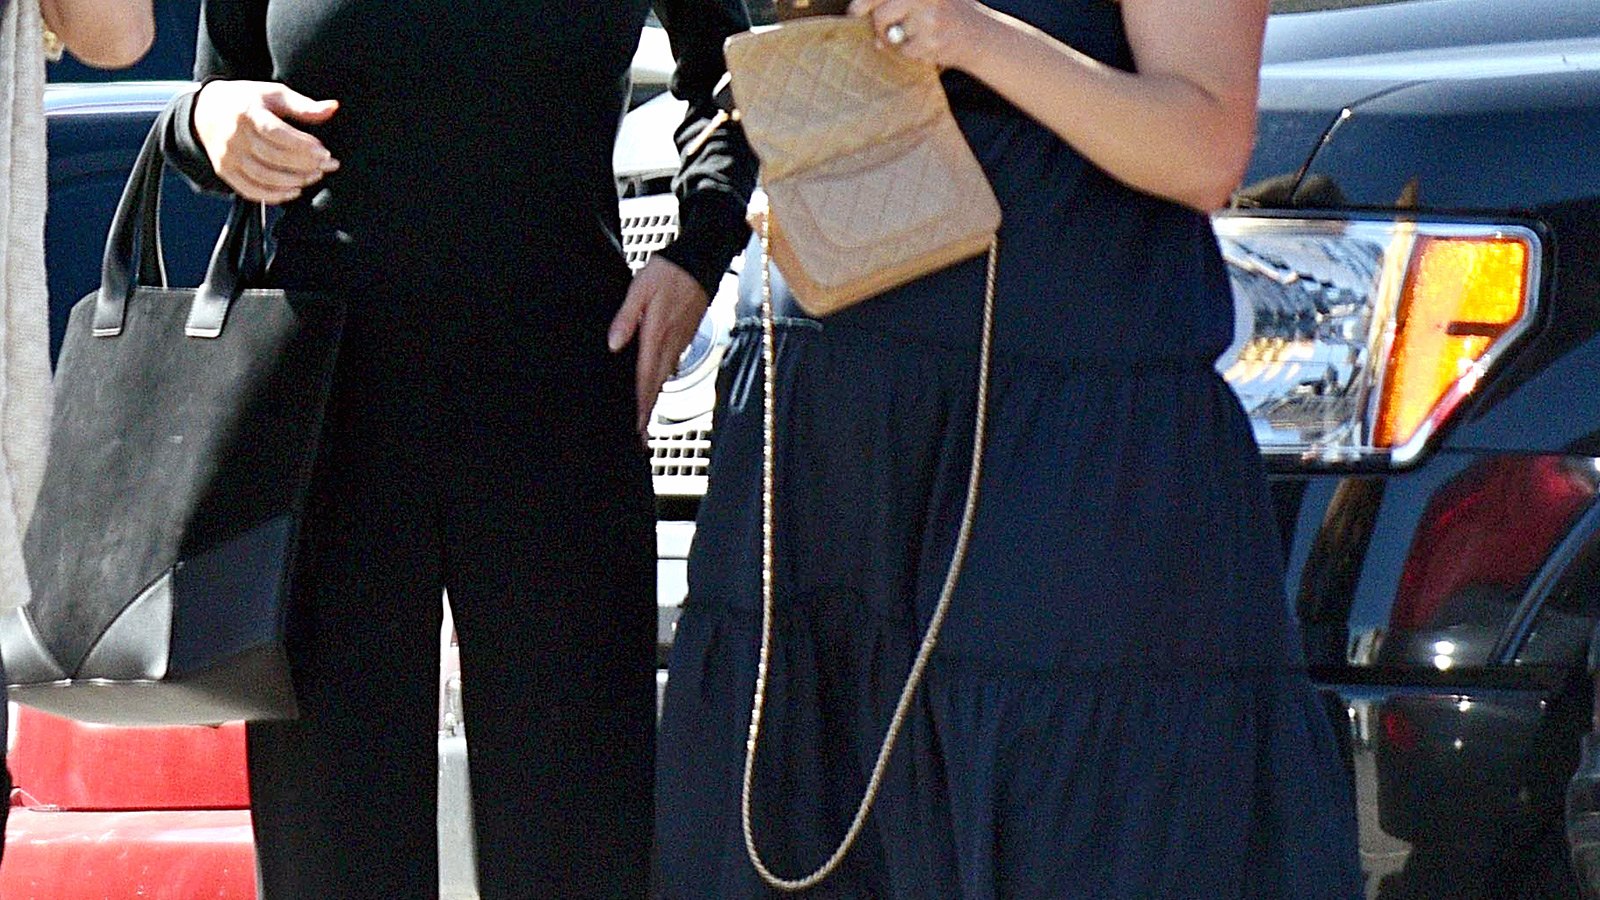 Jessica Simpson and pregnant Cacee Cobb in L.A. on April 8, 2015.